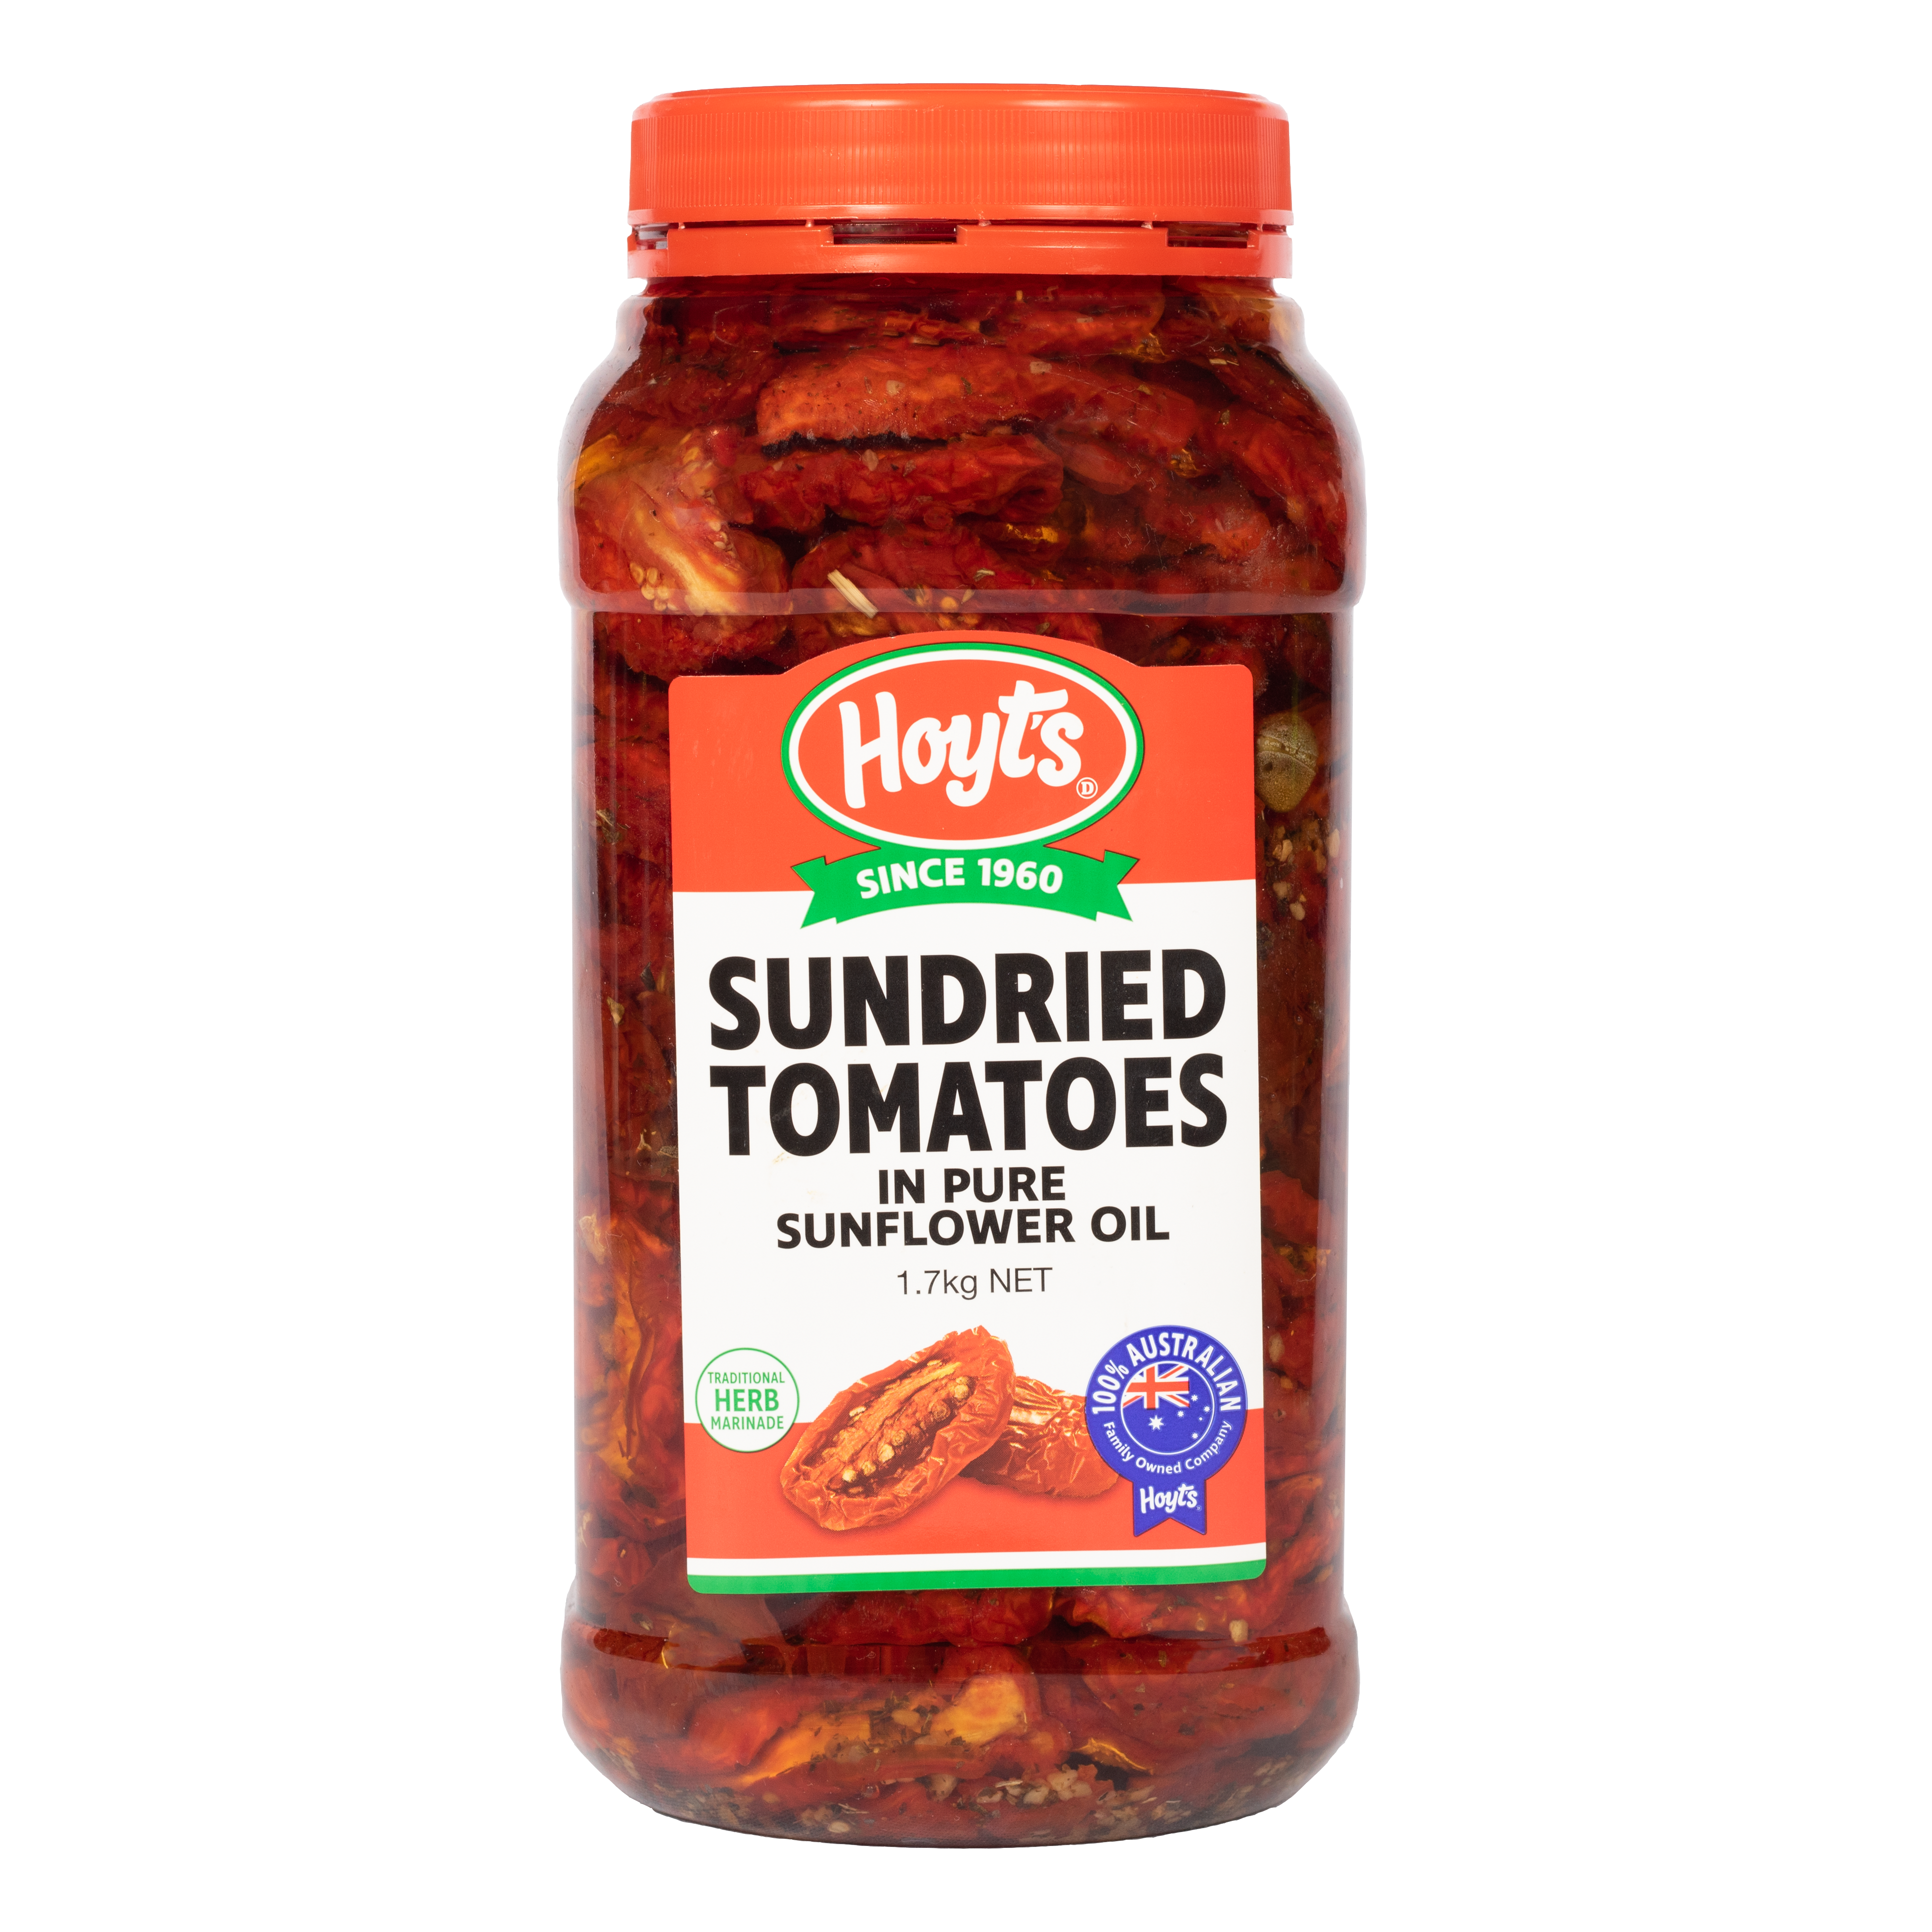 Sundried Tomatoes in oil 1.7kg - 9300725011765